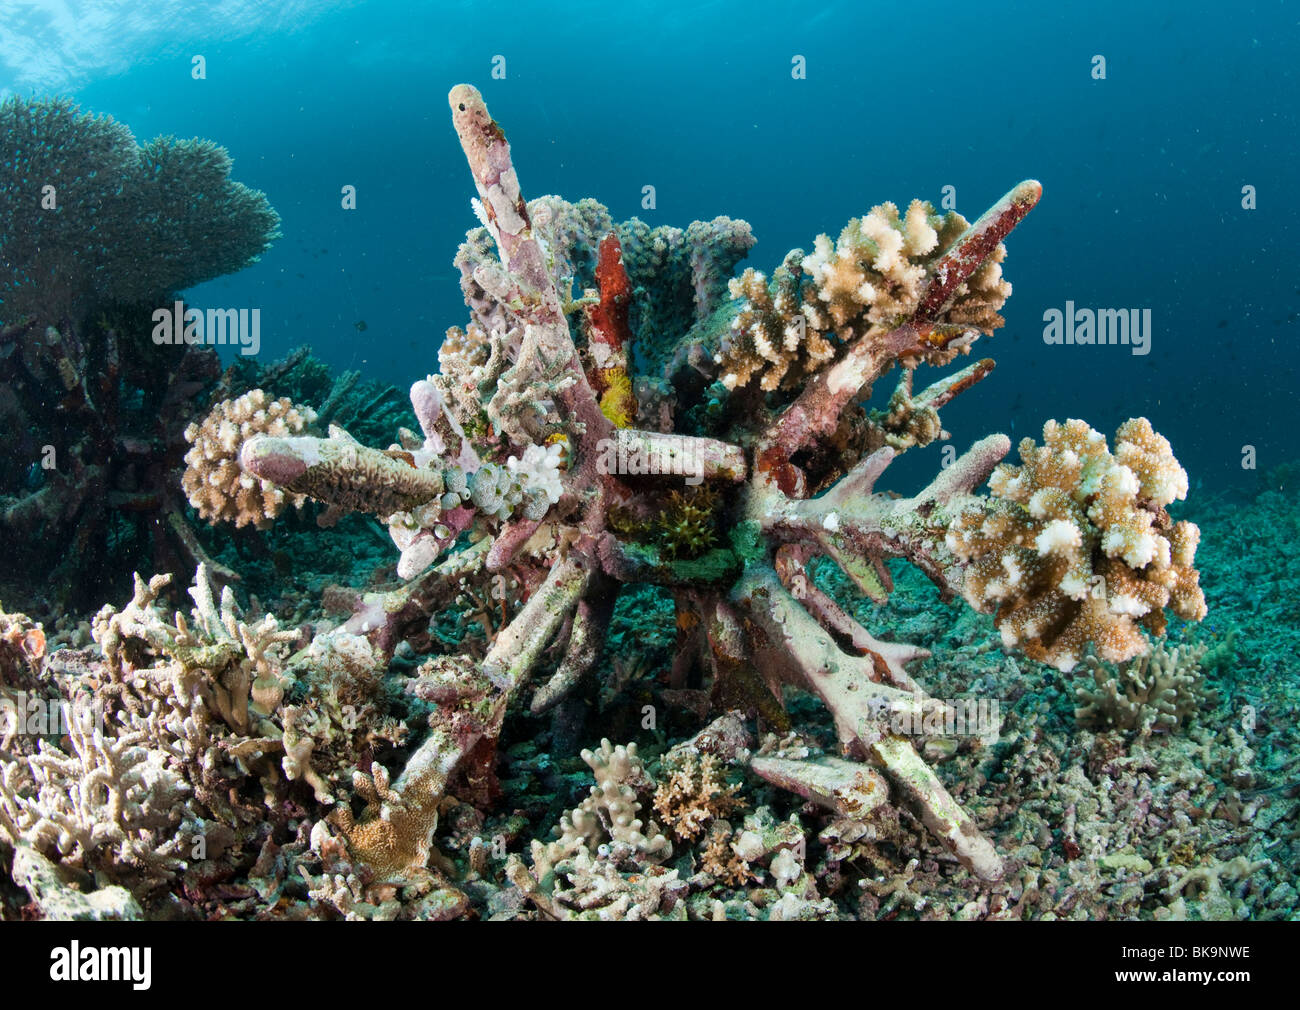 Coral Reef conservation program, new coral reefs should be created by artificial concrete blocks, Bunaken Marine National Park, Stock Photo